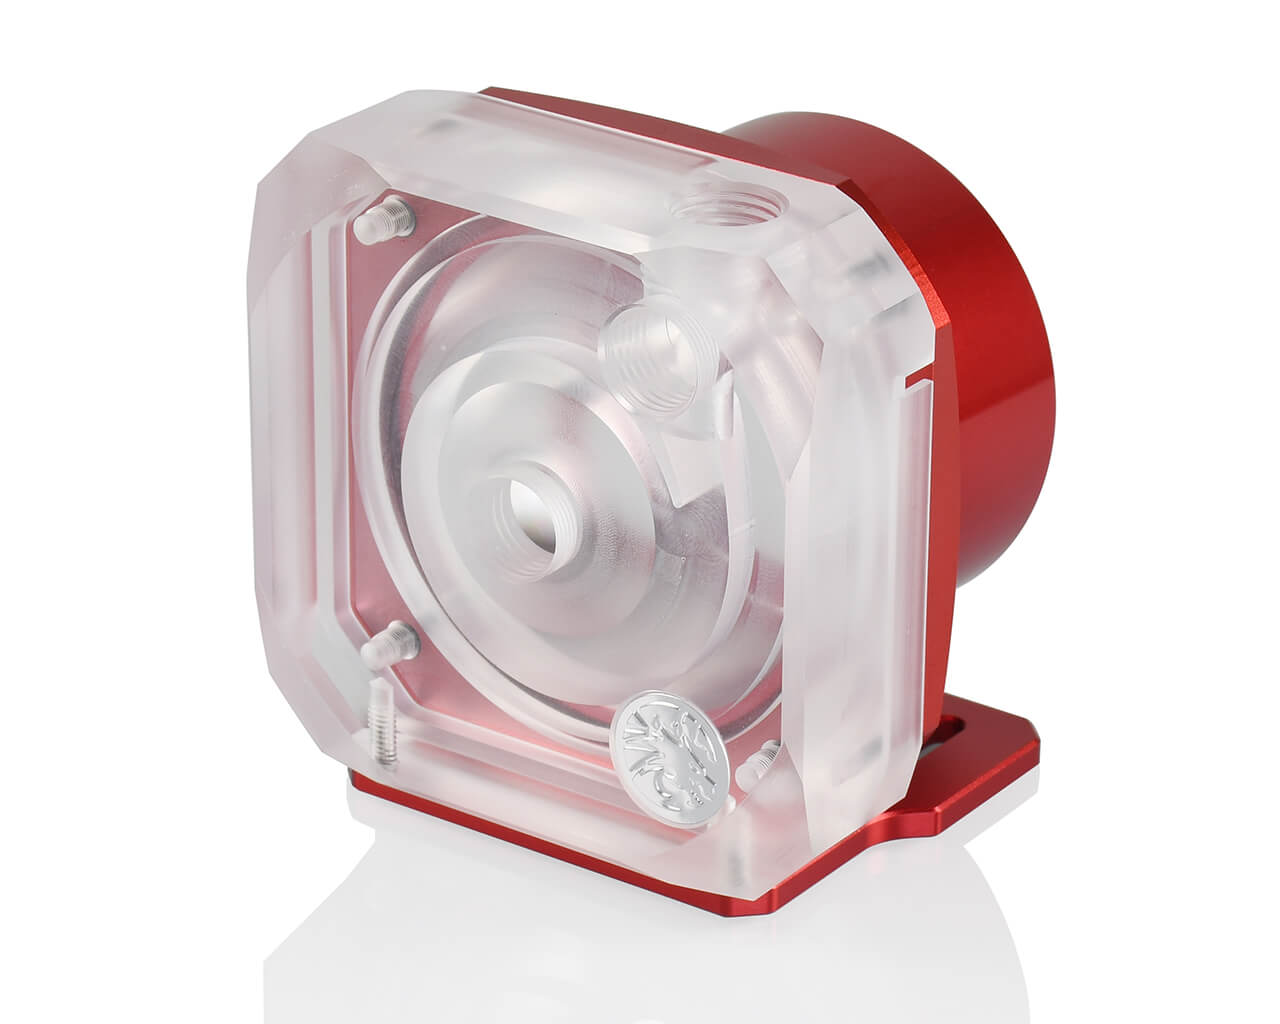 Bykski D5 Pump Top Kit Version 2 - Frosted PMMA - PrimoChill - KEEPING IT COOL Red